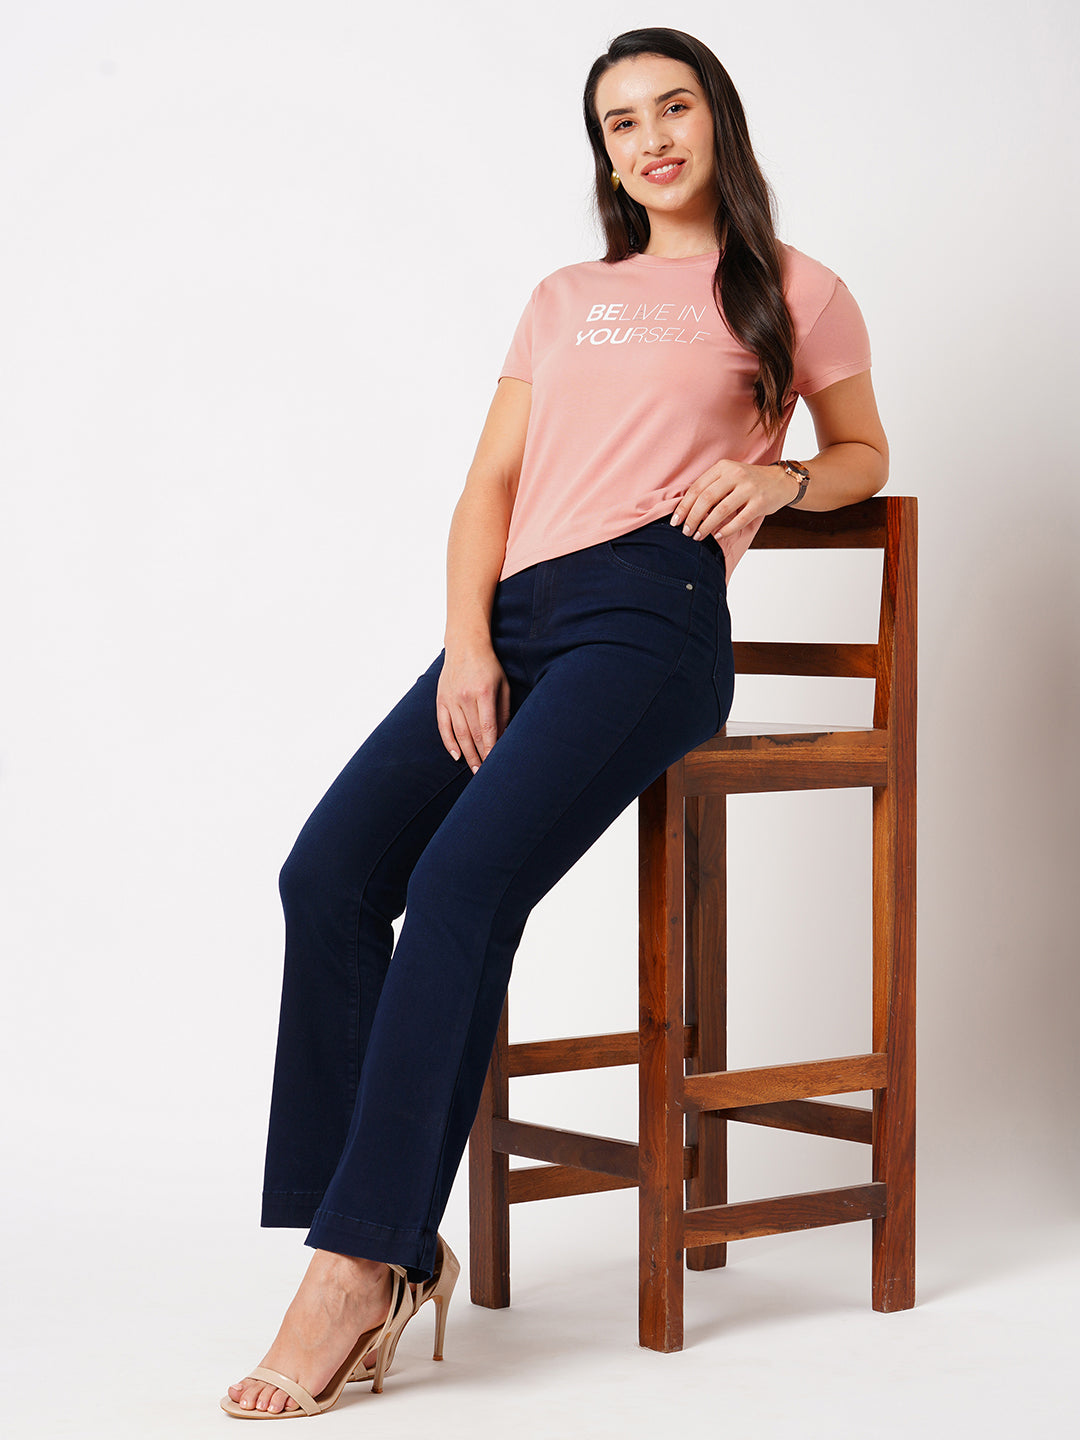 K5013 High Rise Flare Jeans